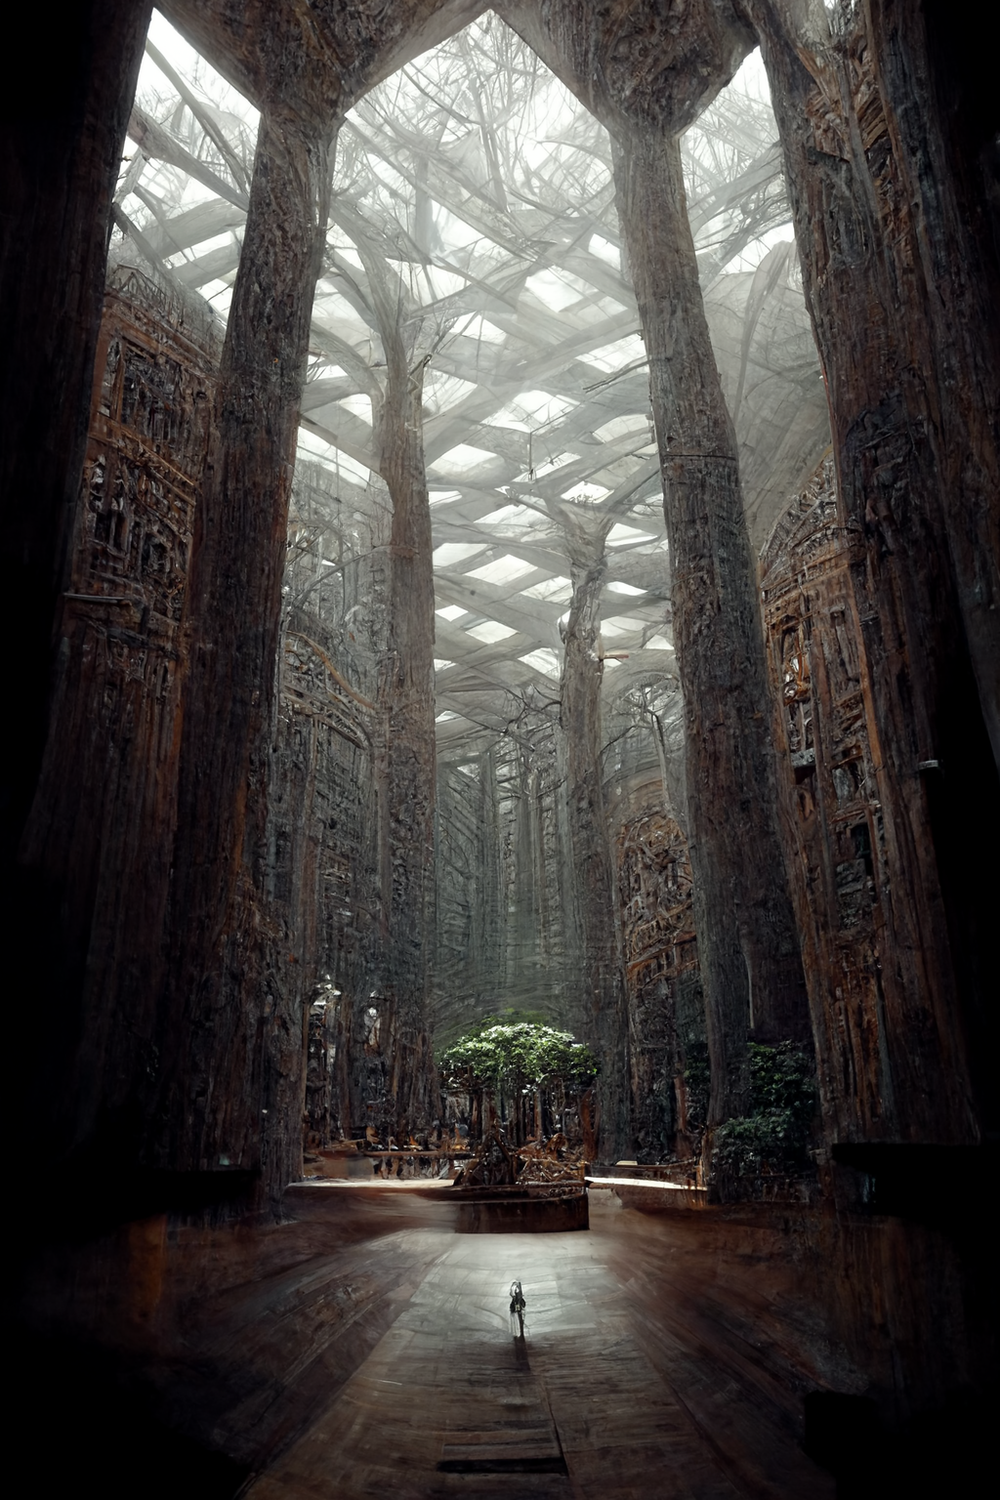 HugoL_A_futuristic_and_somehow_ancient_gigantic_hall_built_by_a_46c05cc0-bde7-4d4e-be5b-99c04af039de.png